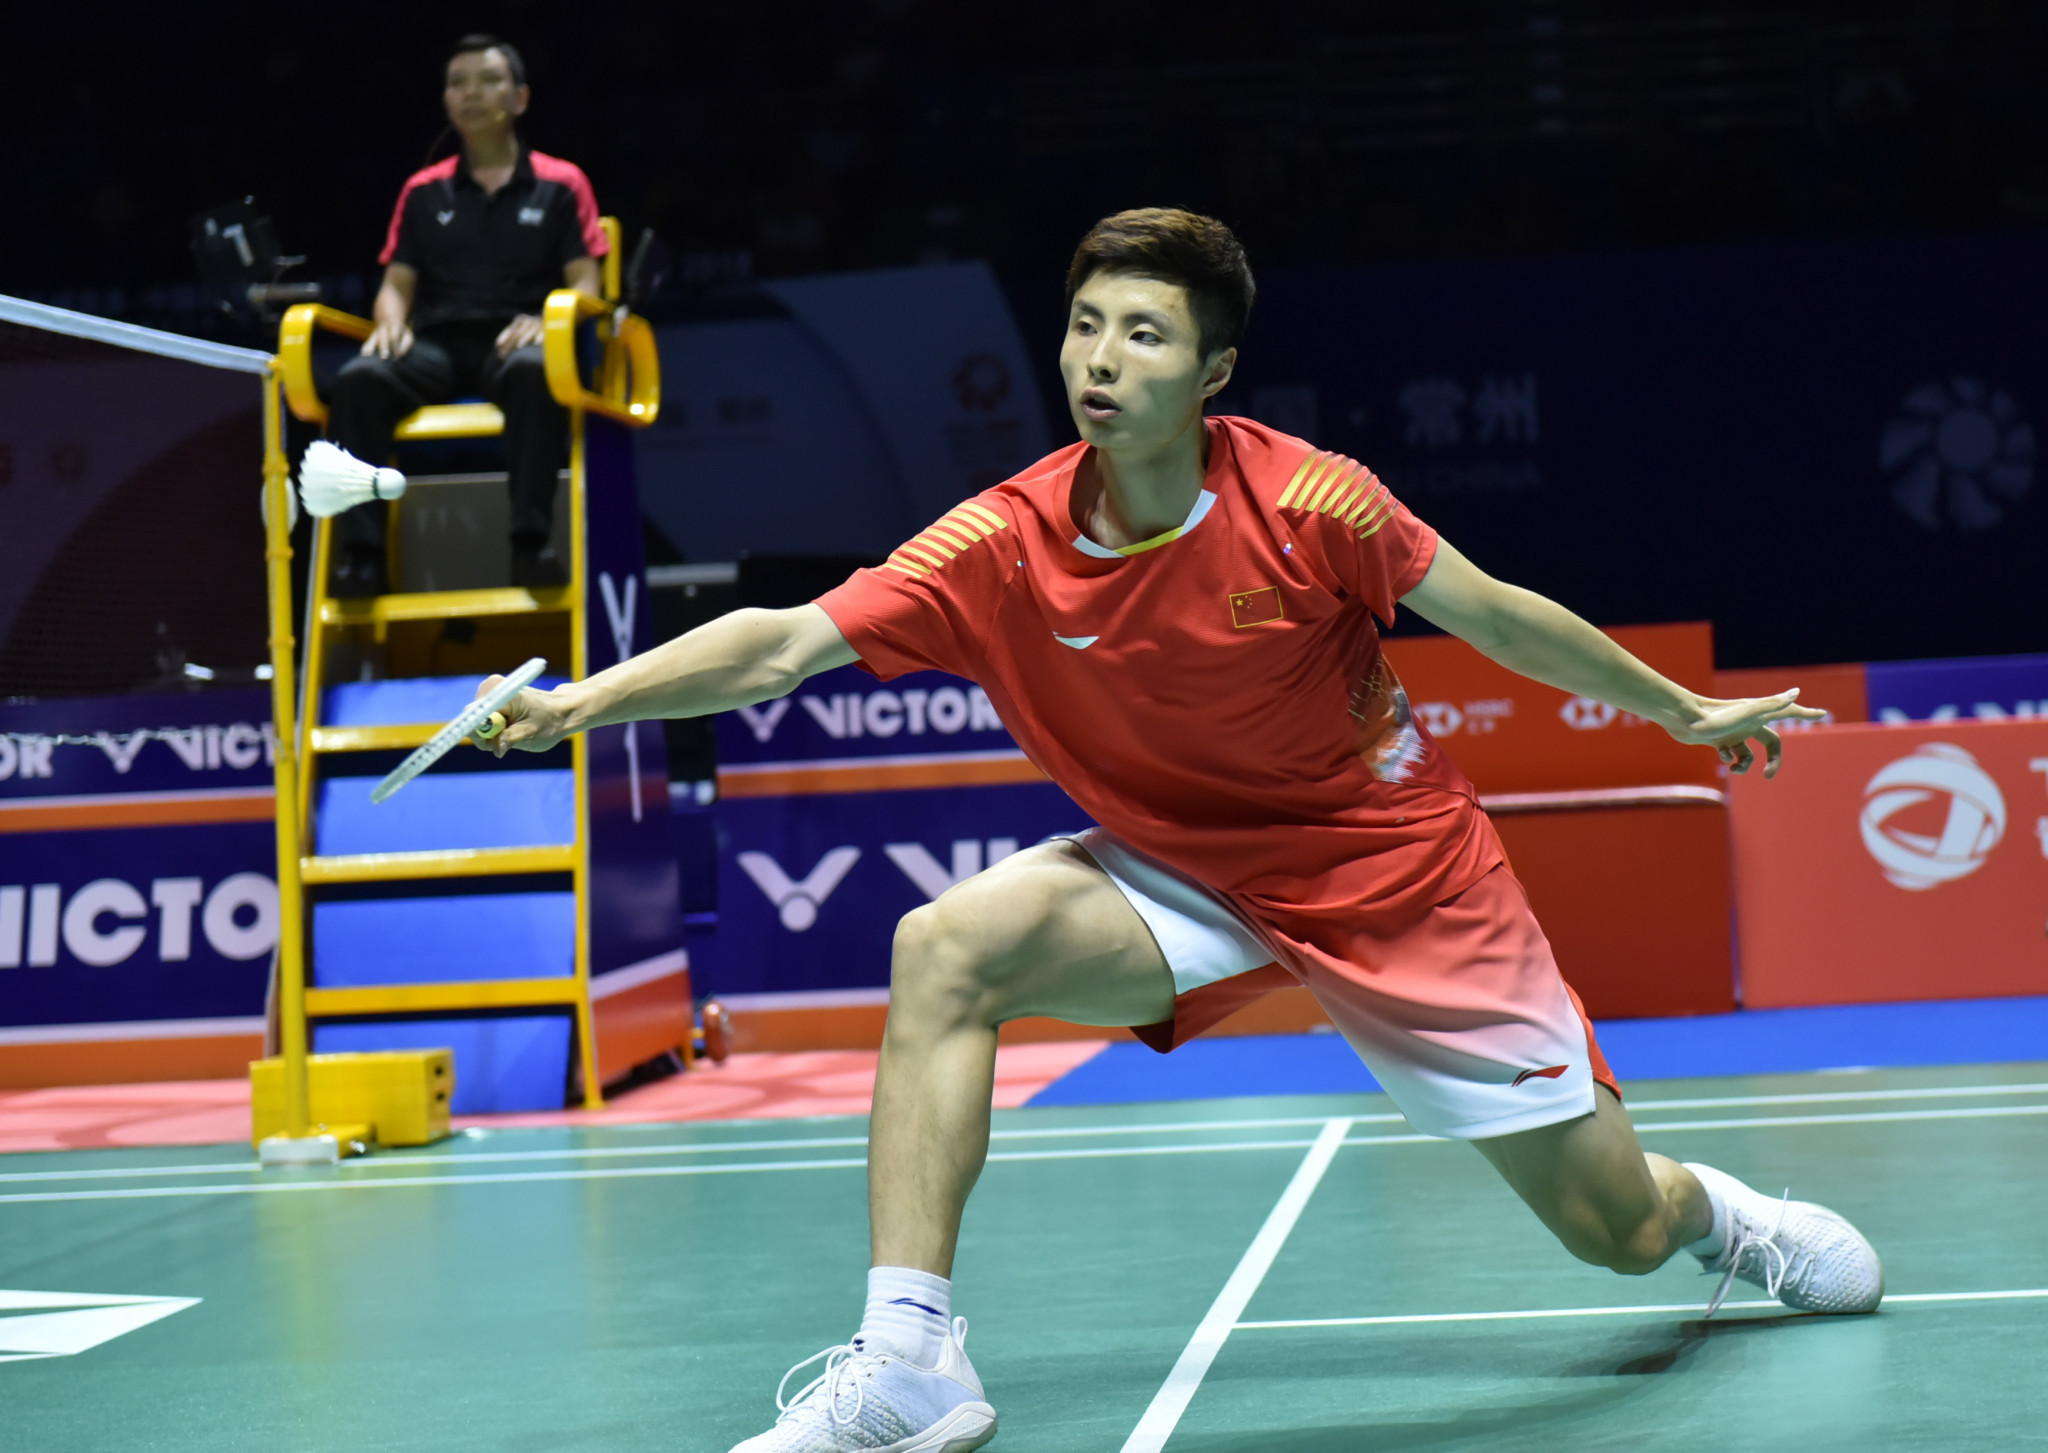 Home players dominate in front of home crowd at BWF Fuzhou China Open